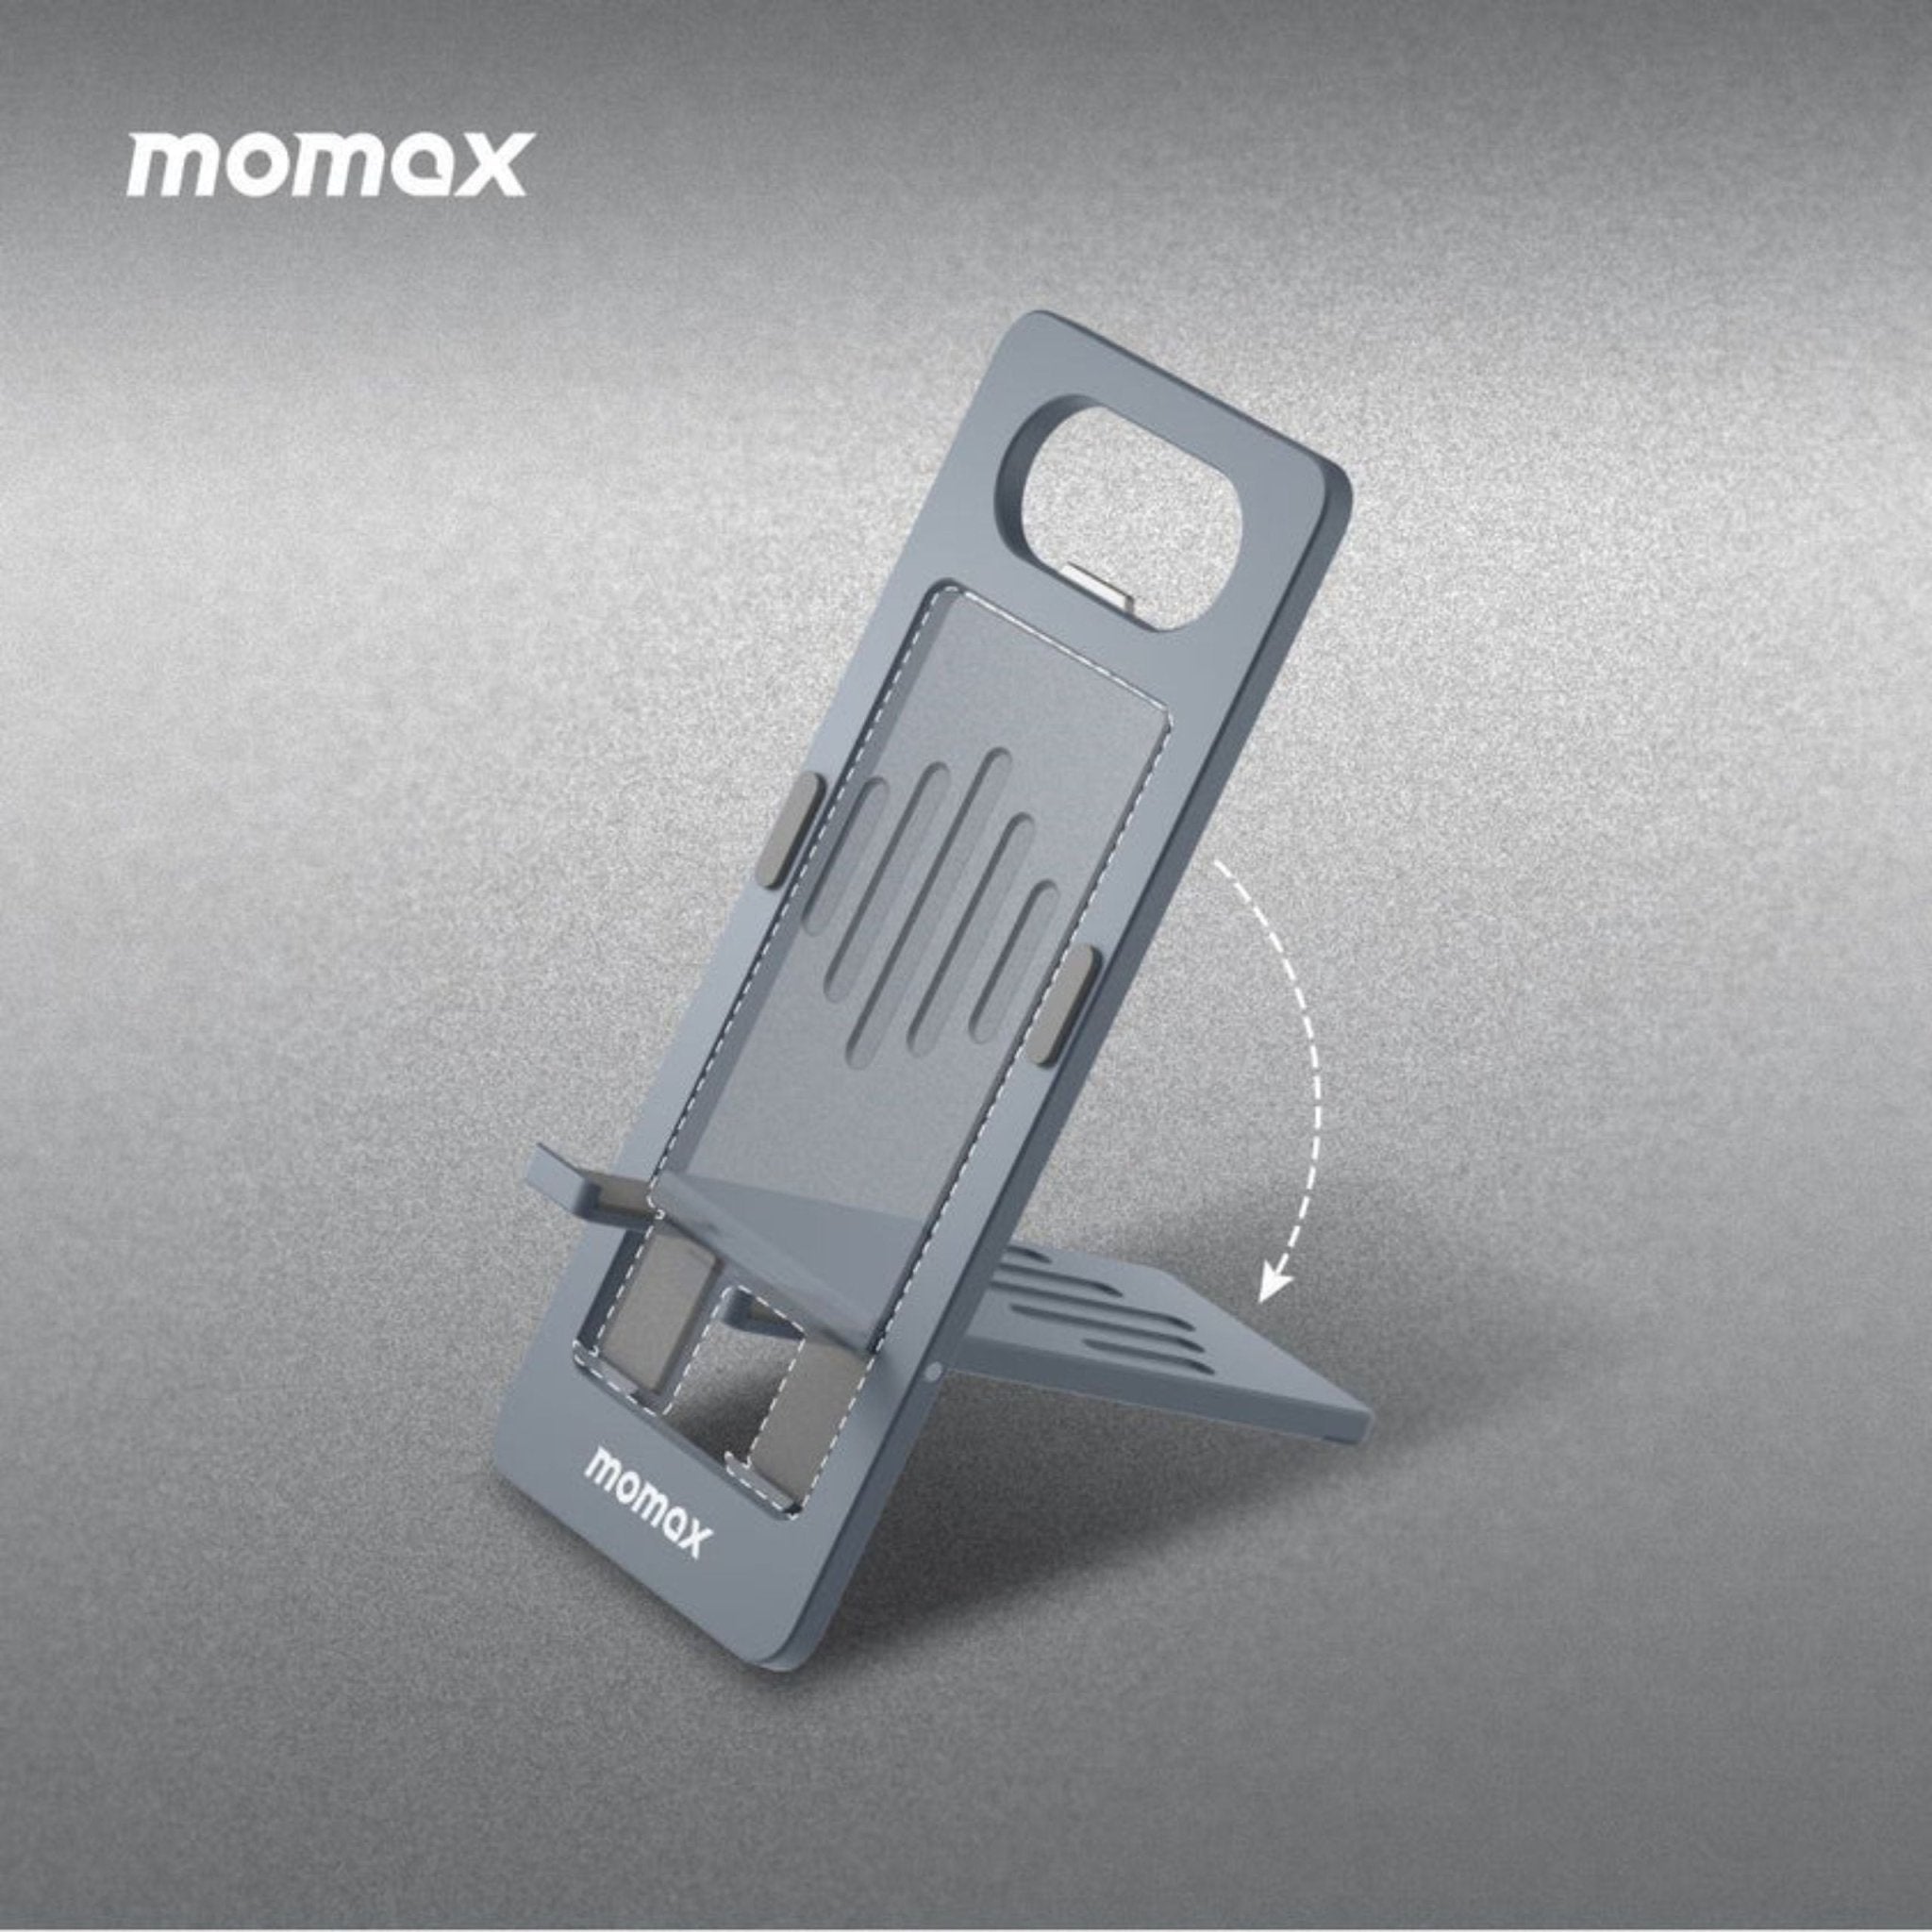 Momax Fold Stand Handy Phone Stand - Grey